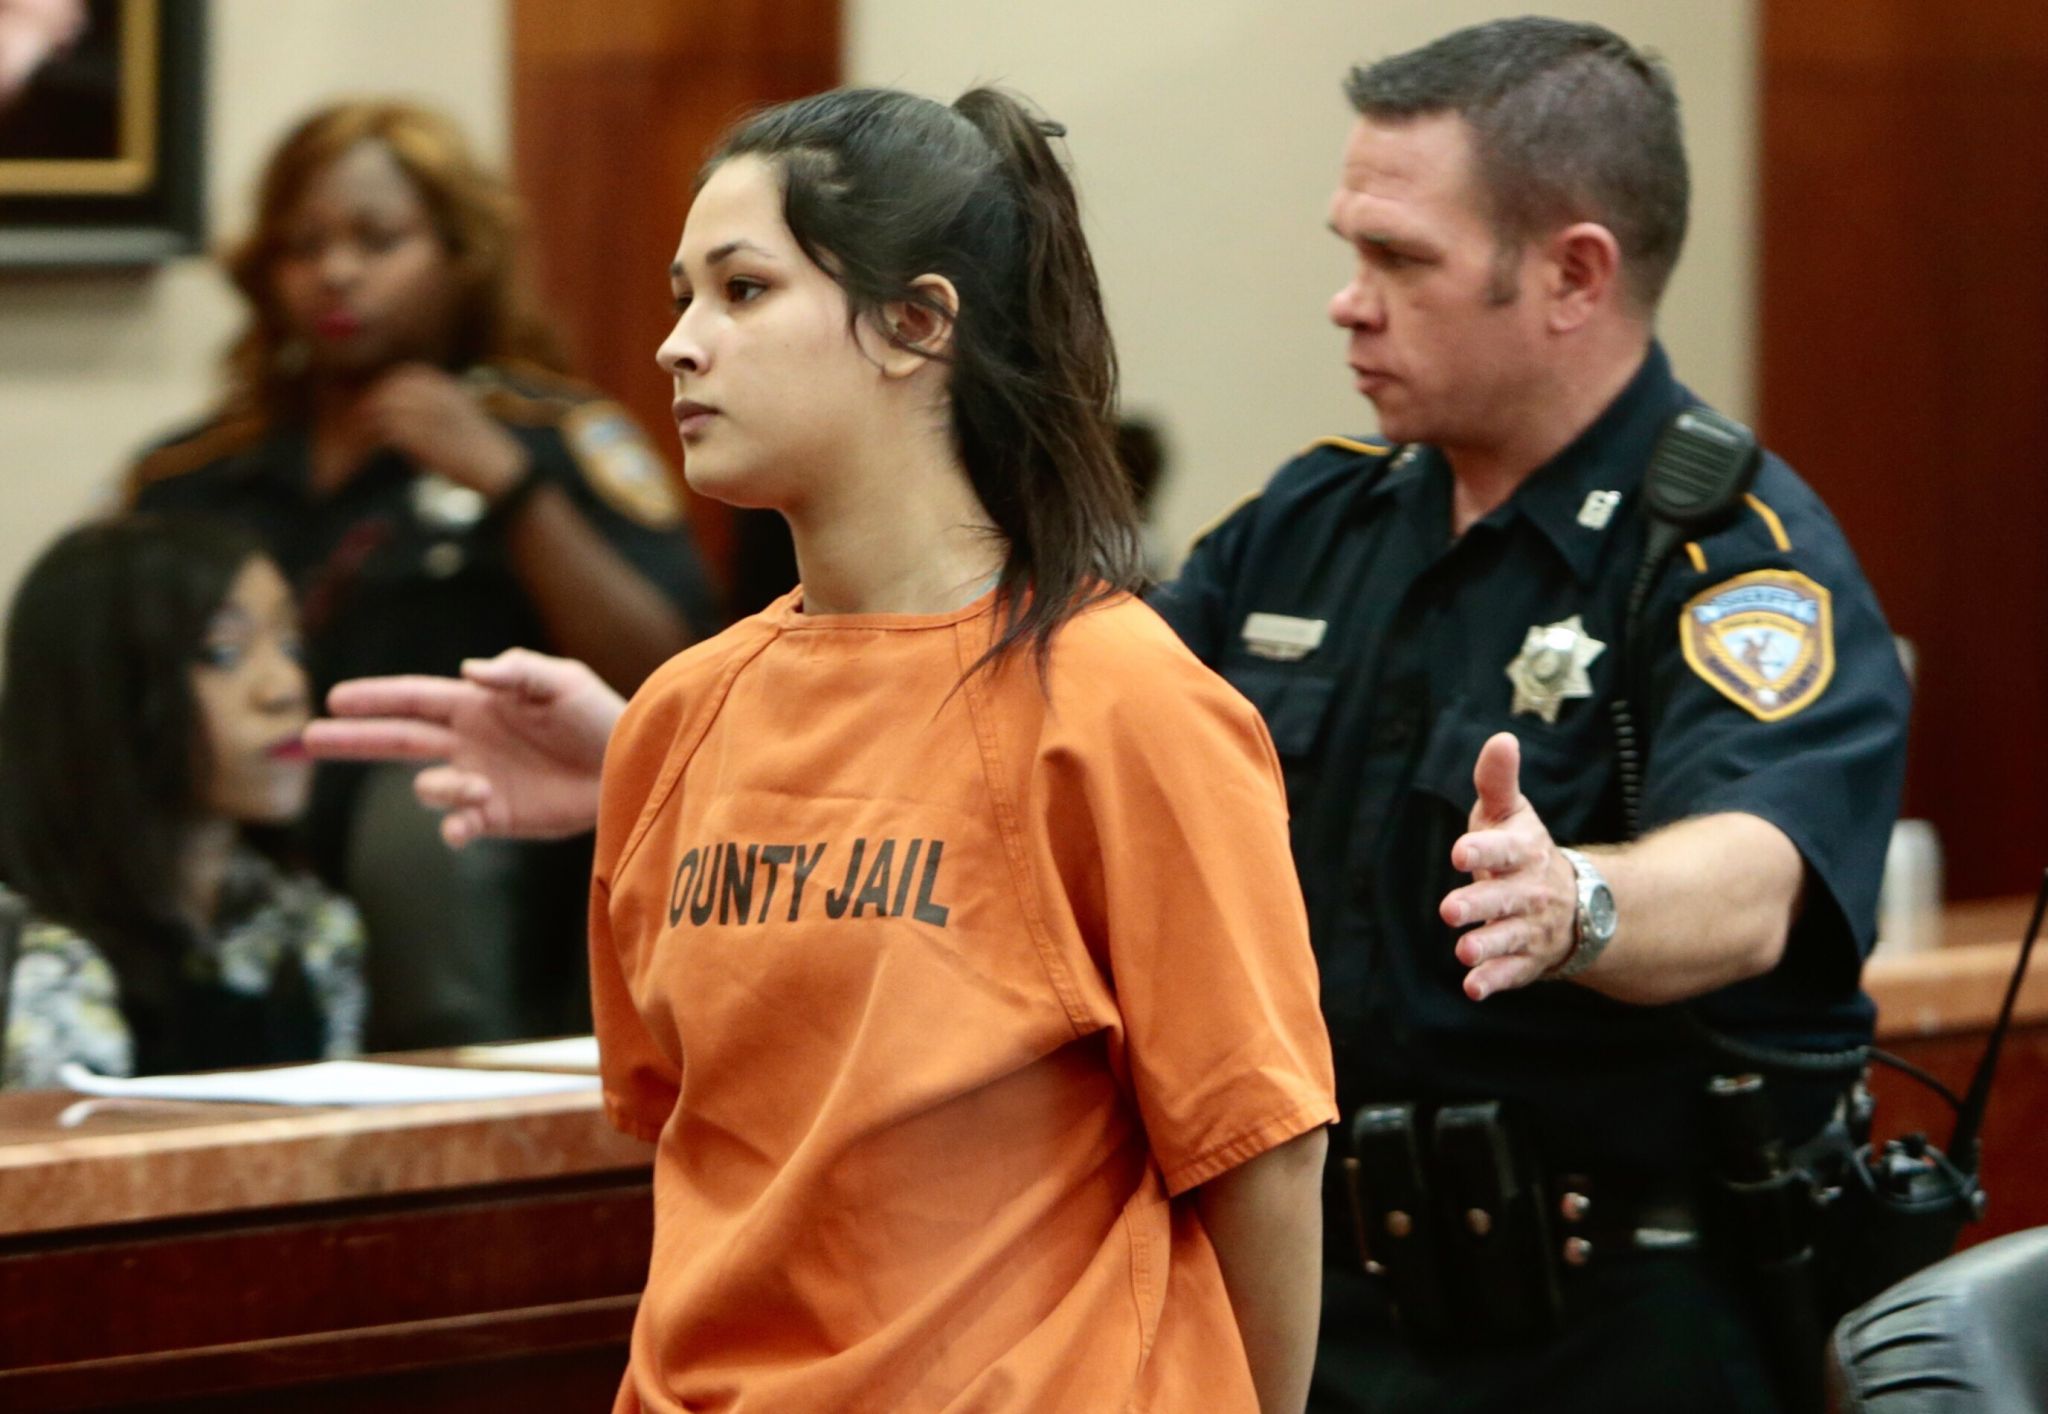 19 Year Old Woman Accused Of Pimping 14 Year Old Girl Appears In Court Houston Chronicle 